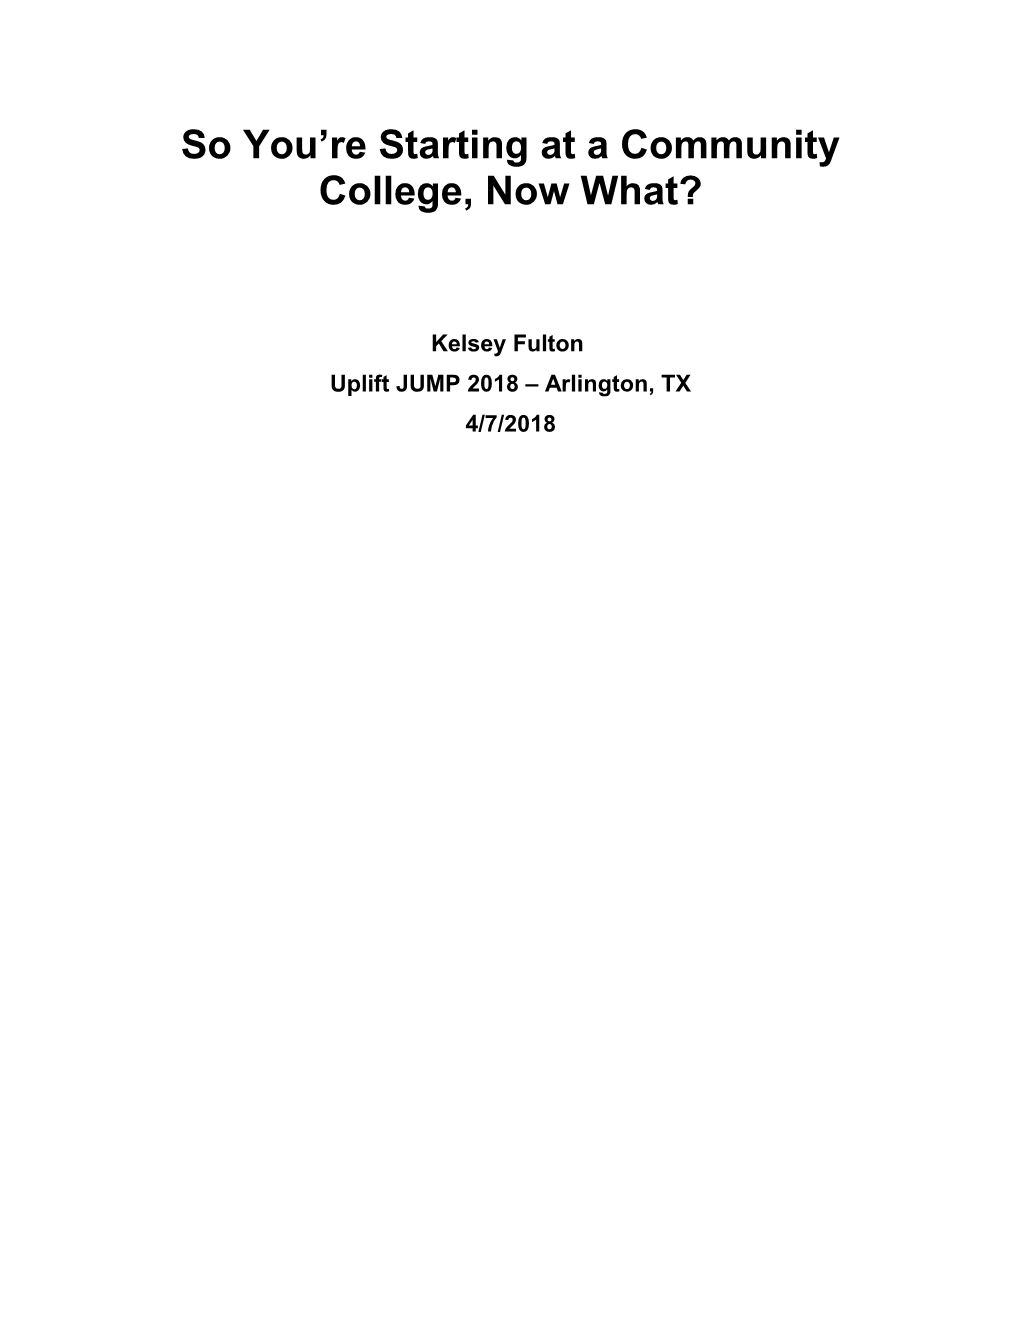 So You Re Starting at a Community College, Now What?